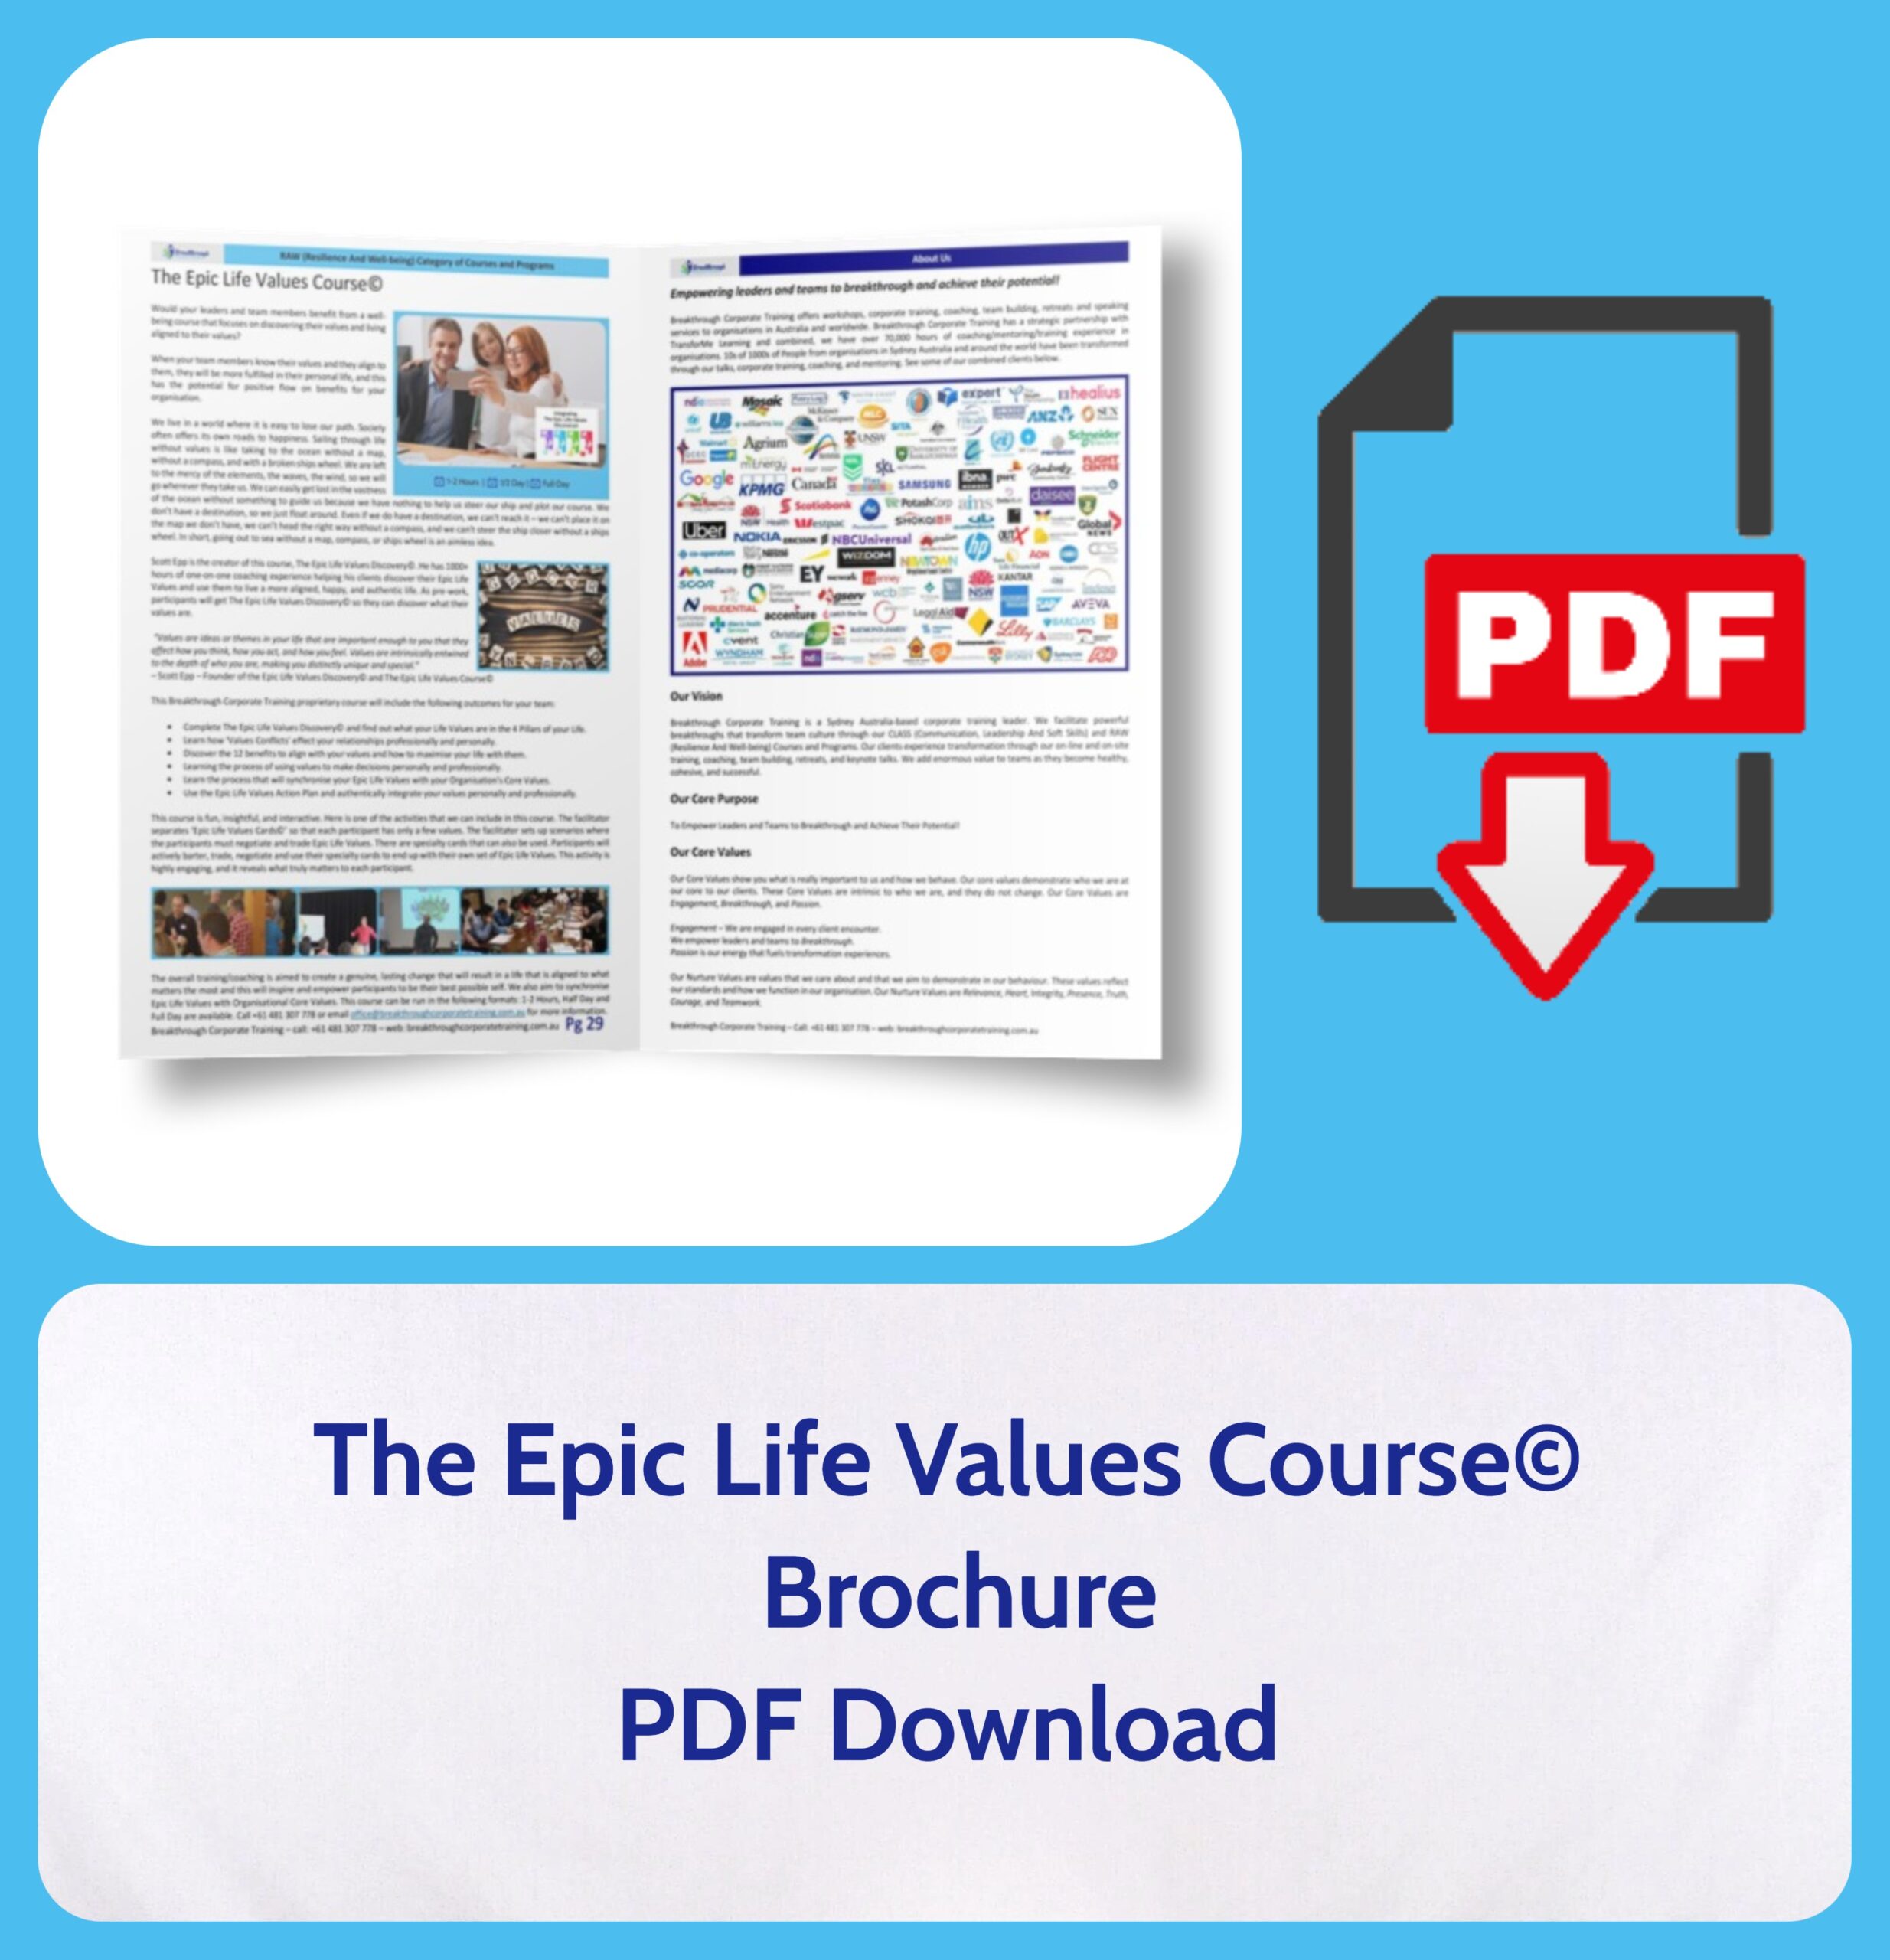 The Epic Life Values Course